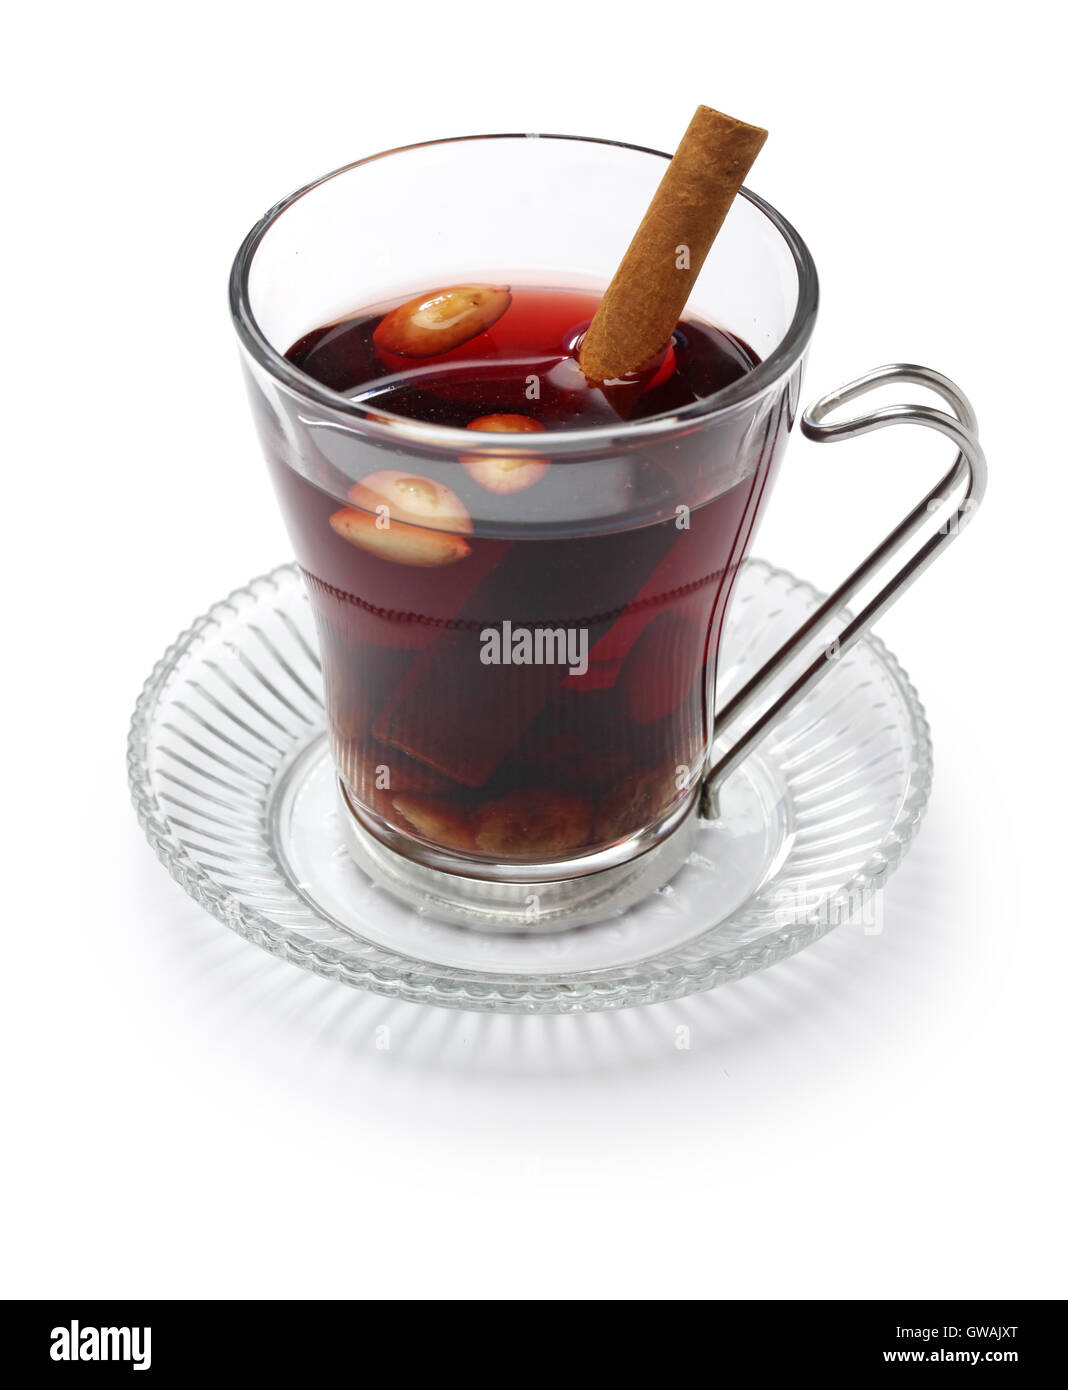 glogg, scandinavian mulled wine, traditional christmas hot beverage isolated on white background Stock Photo